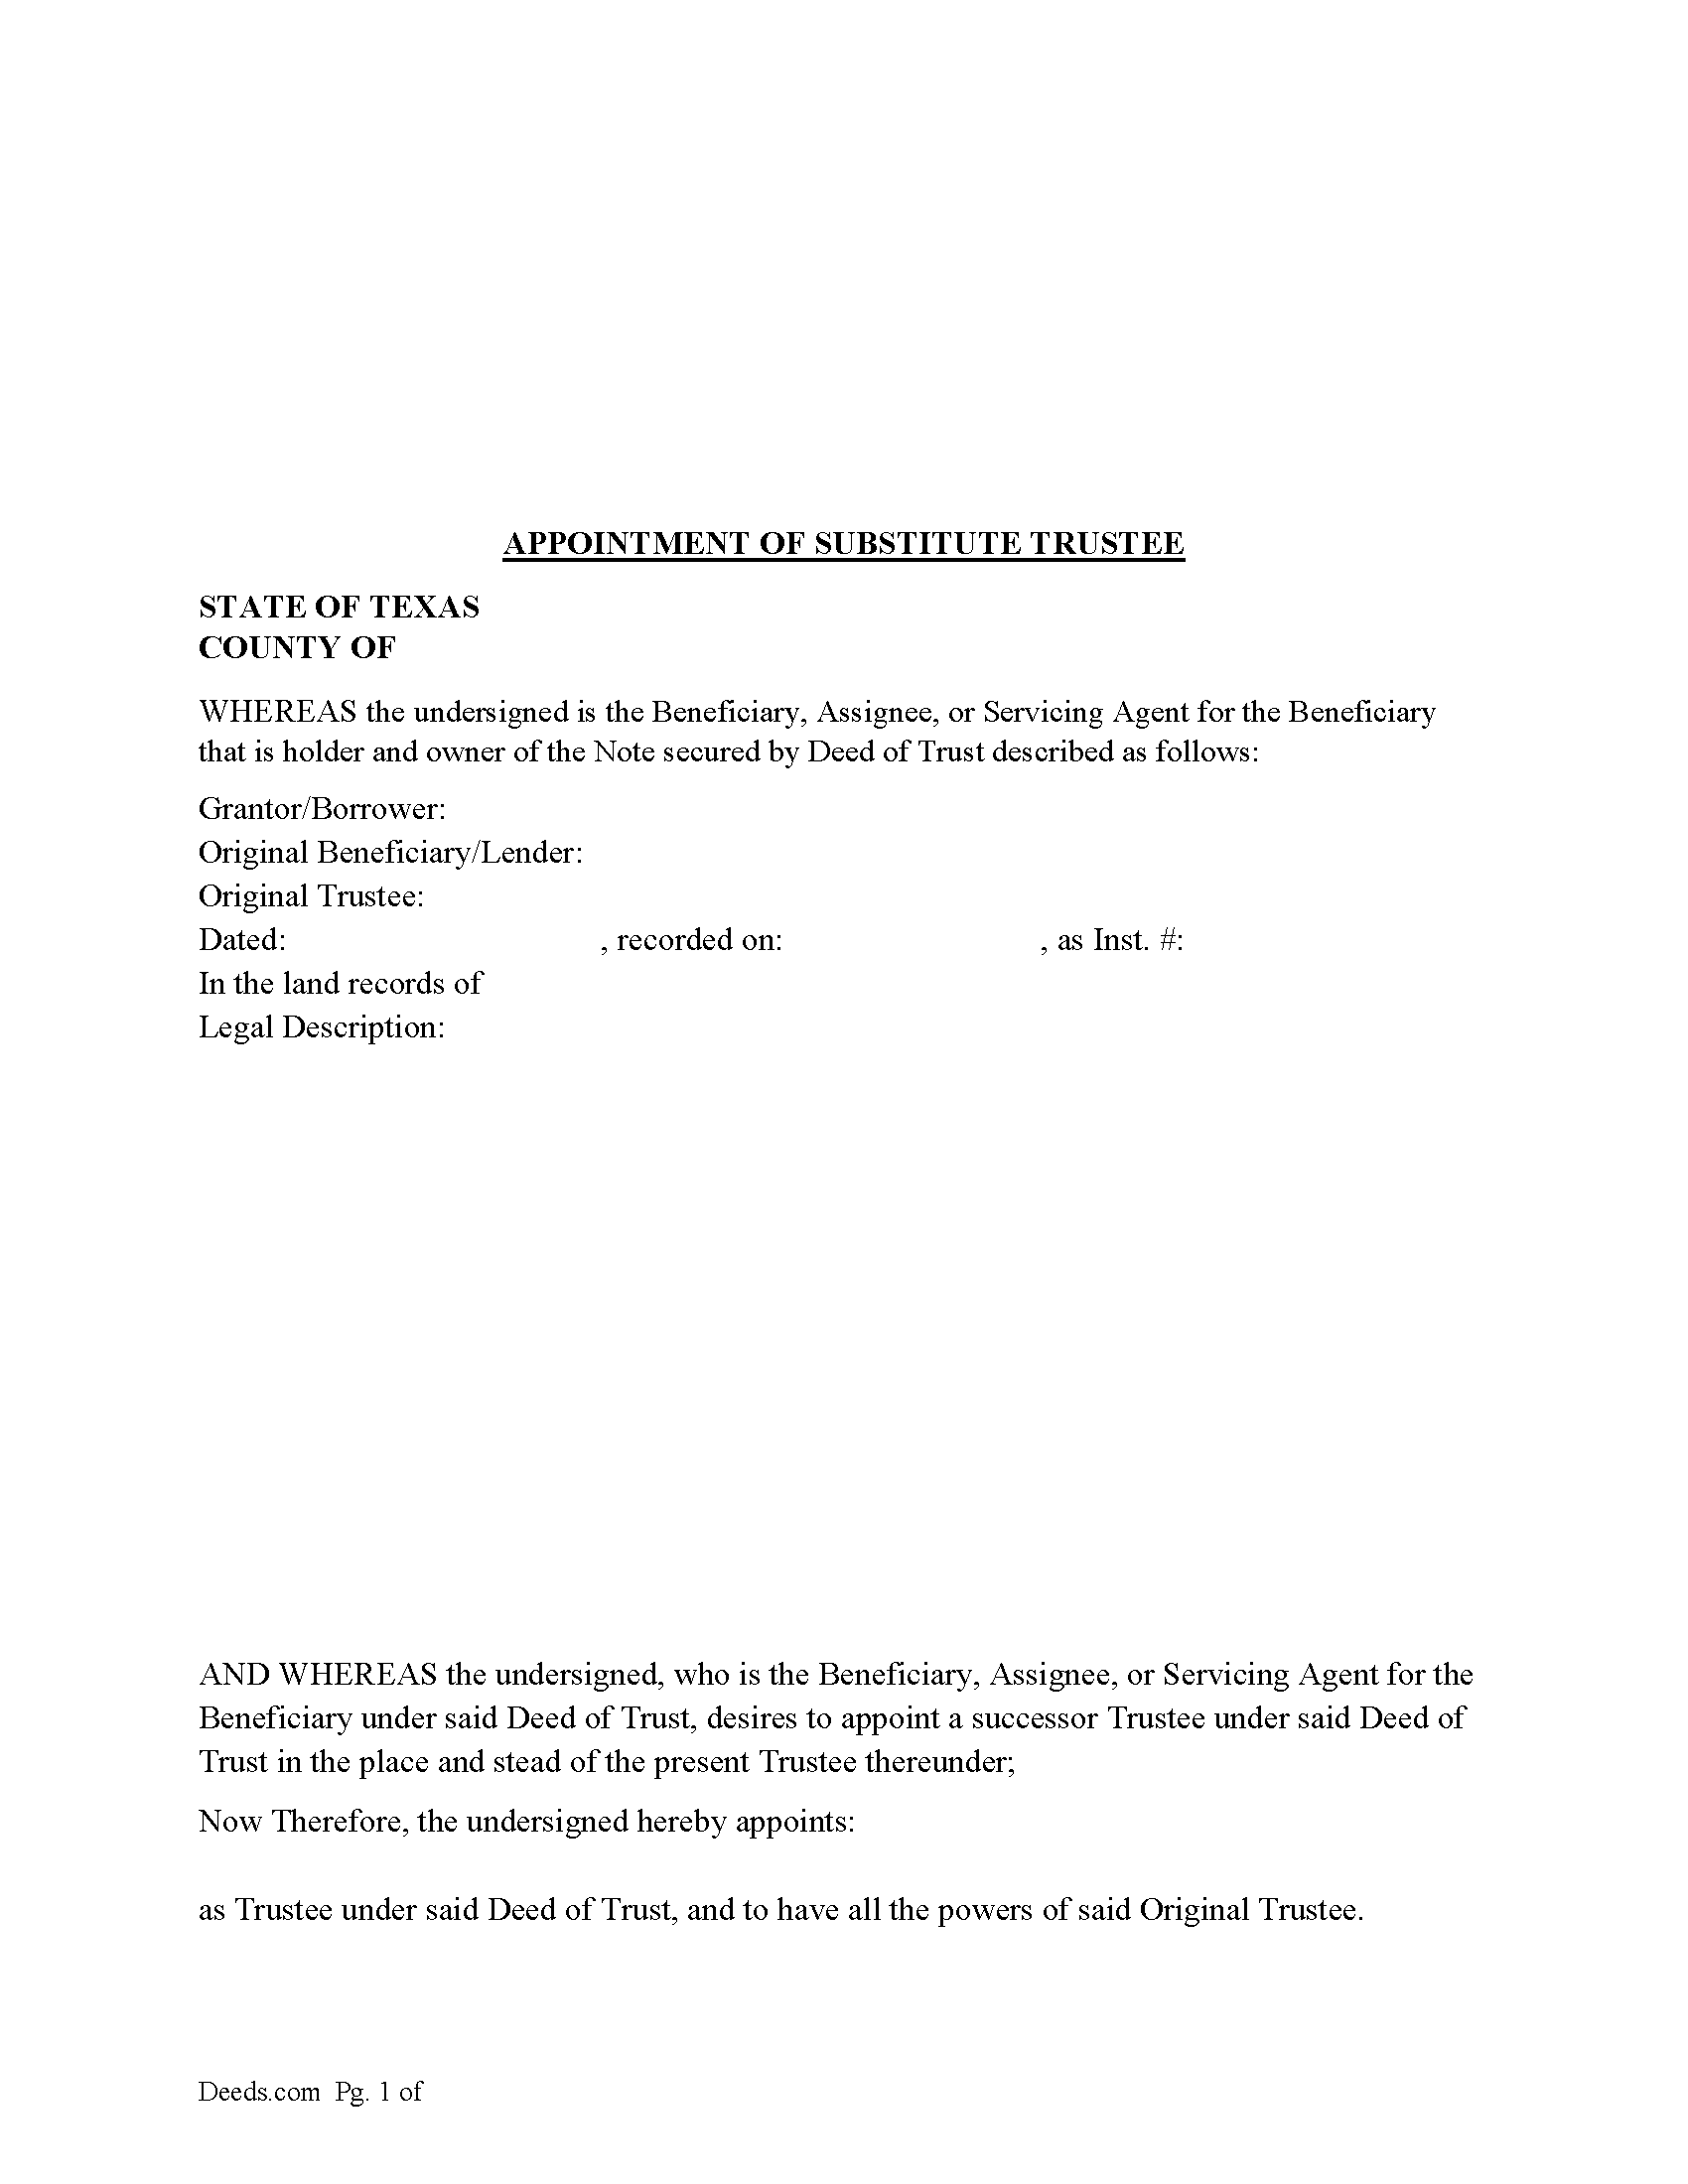 Appointment of Substitute Trustee Form